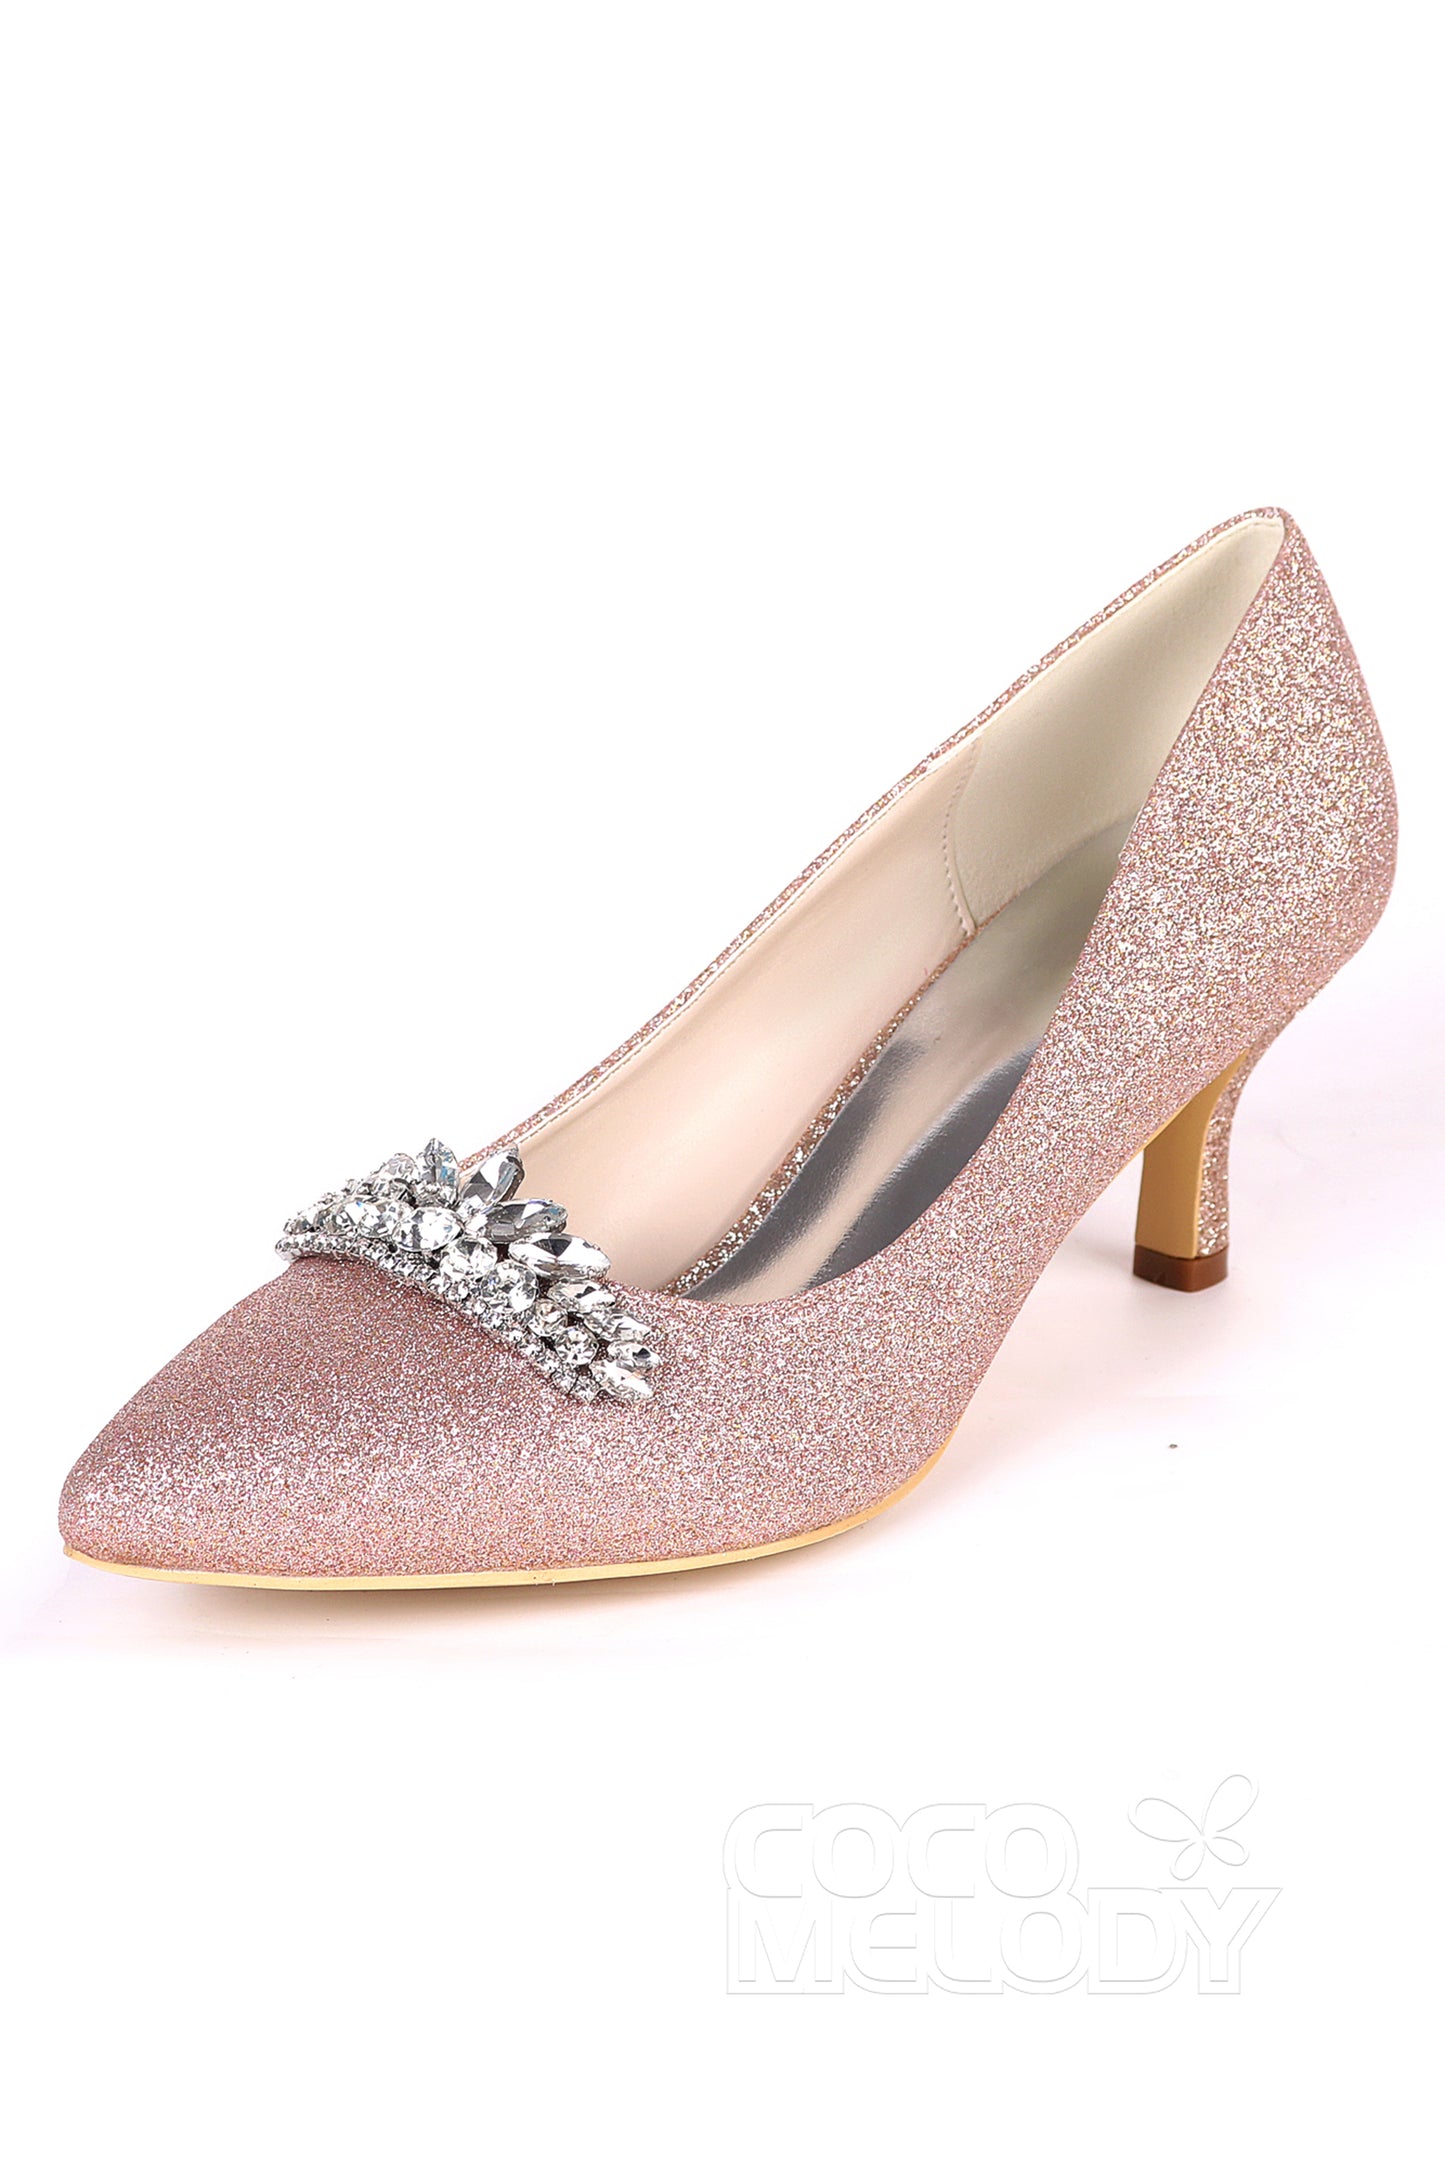 Low Heel Sparkling Pointed Toe Wedding shoes CK0075